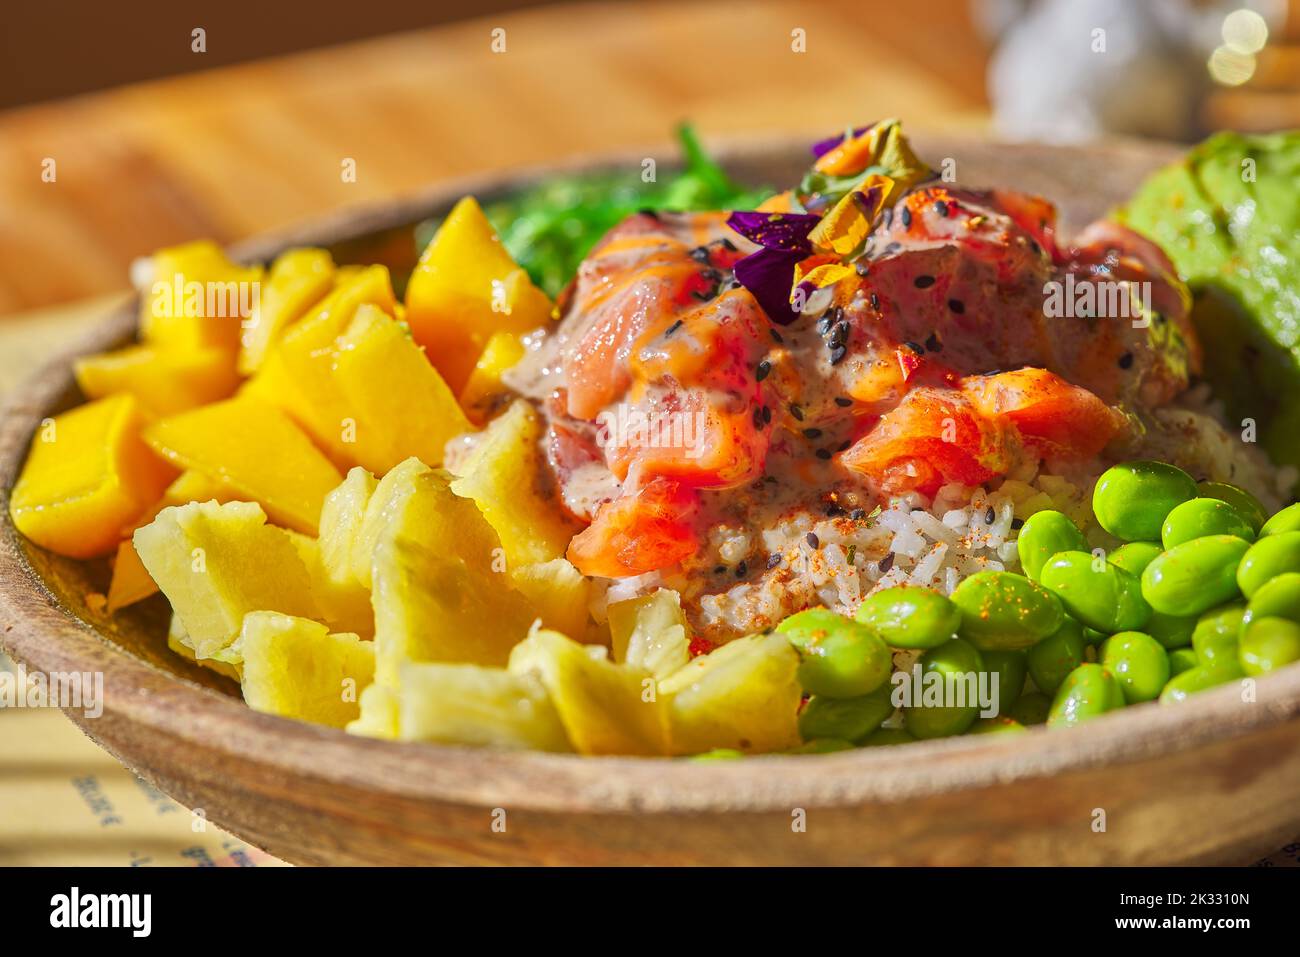 Tuna and Salmon Poke bowl Raw fish salad Asian food with beans edamame, quinoa, avocado, pineapple, cucumber and lettuce in bowl - close up view Stock Photo